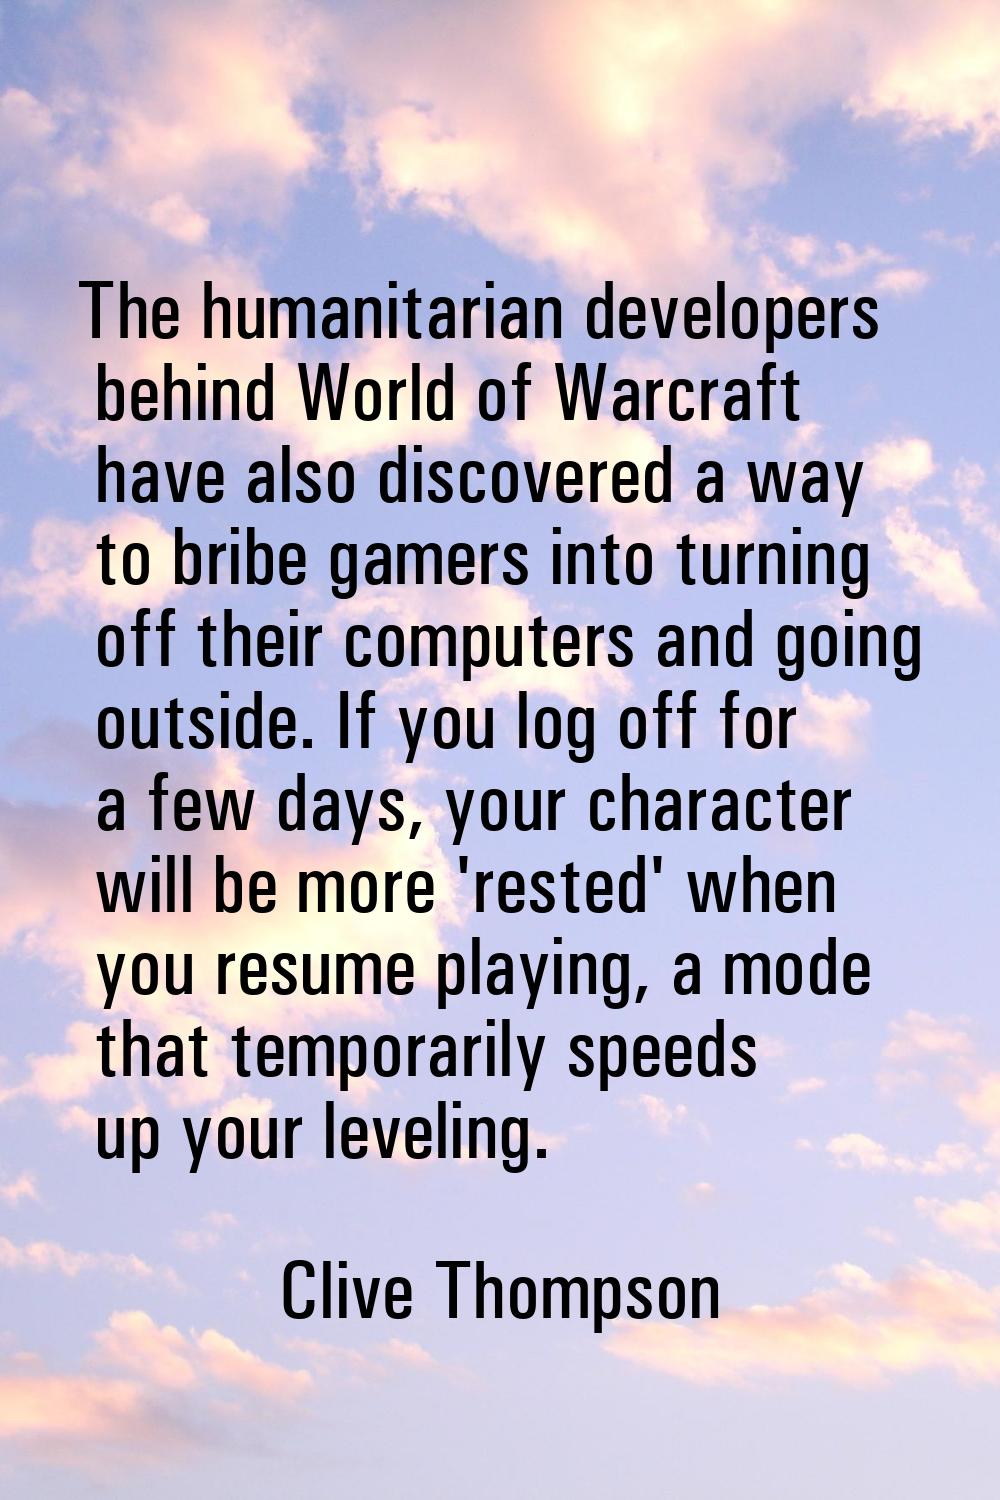 The humanitarian developers behind World of Warcraft have also discovered a way to bribe gamers int